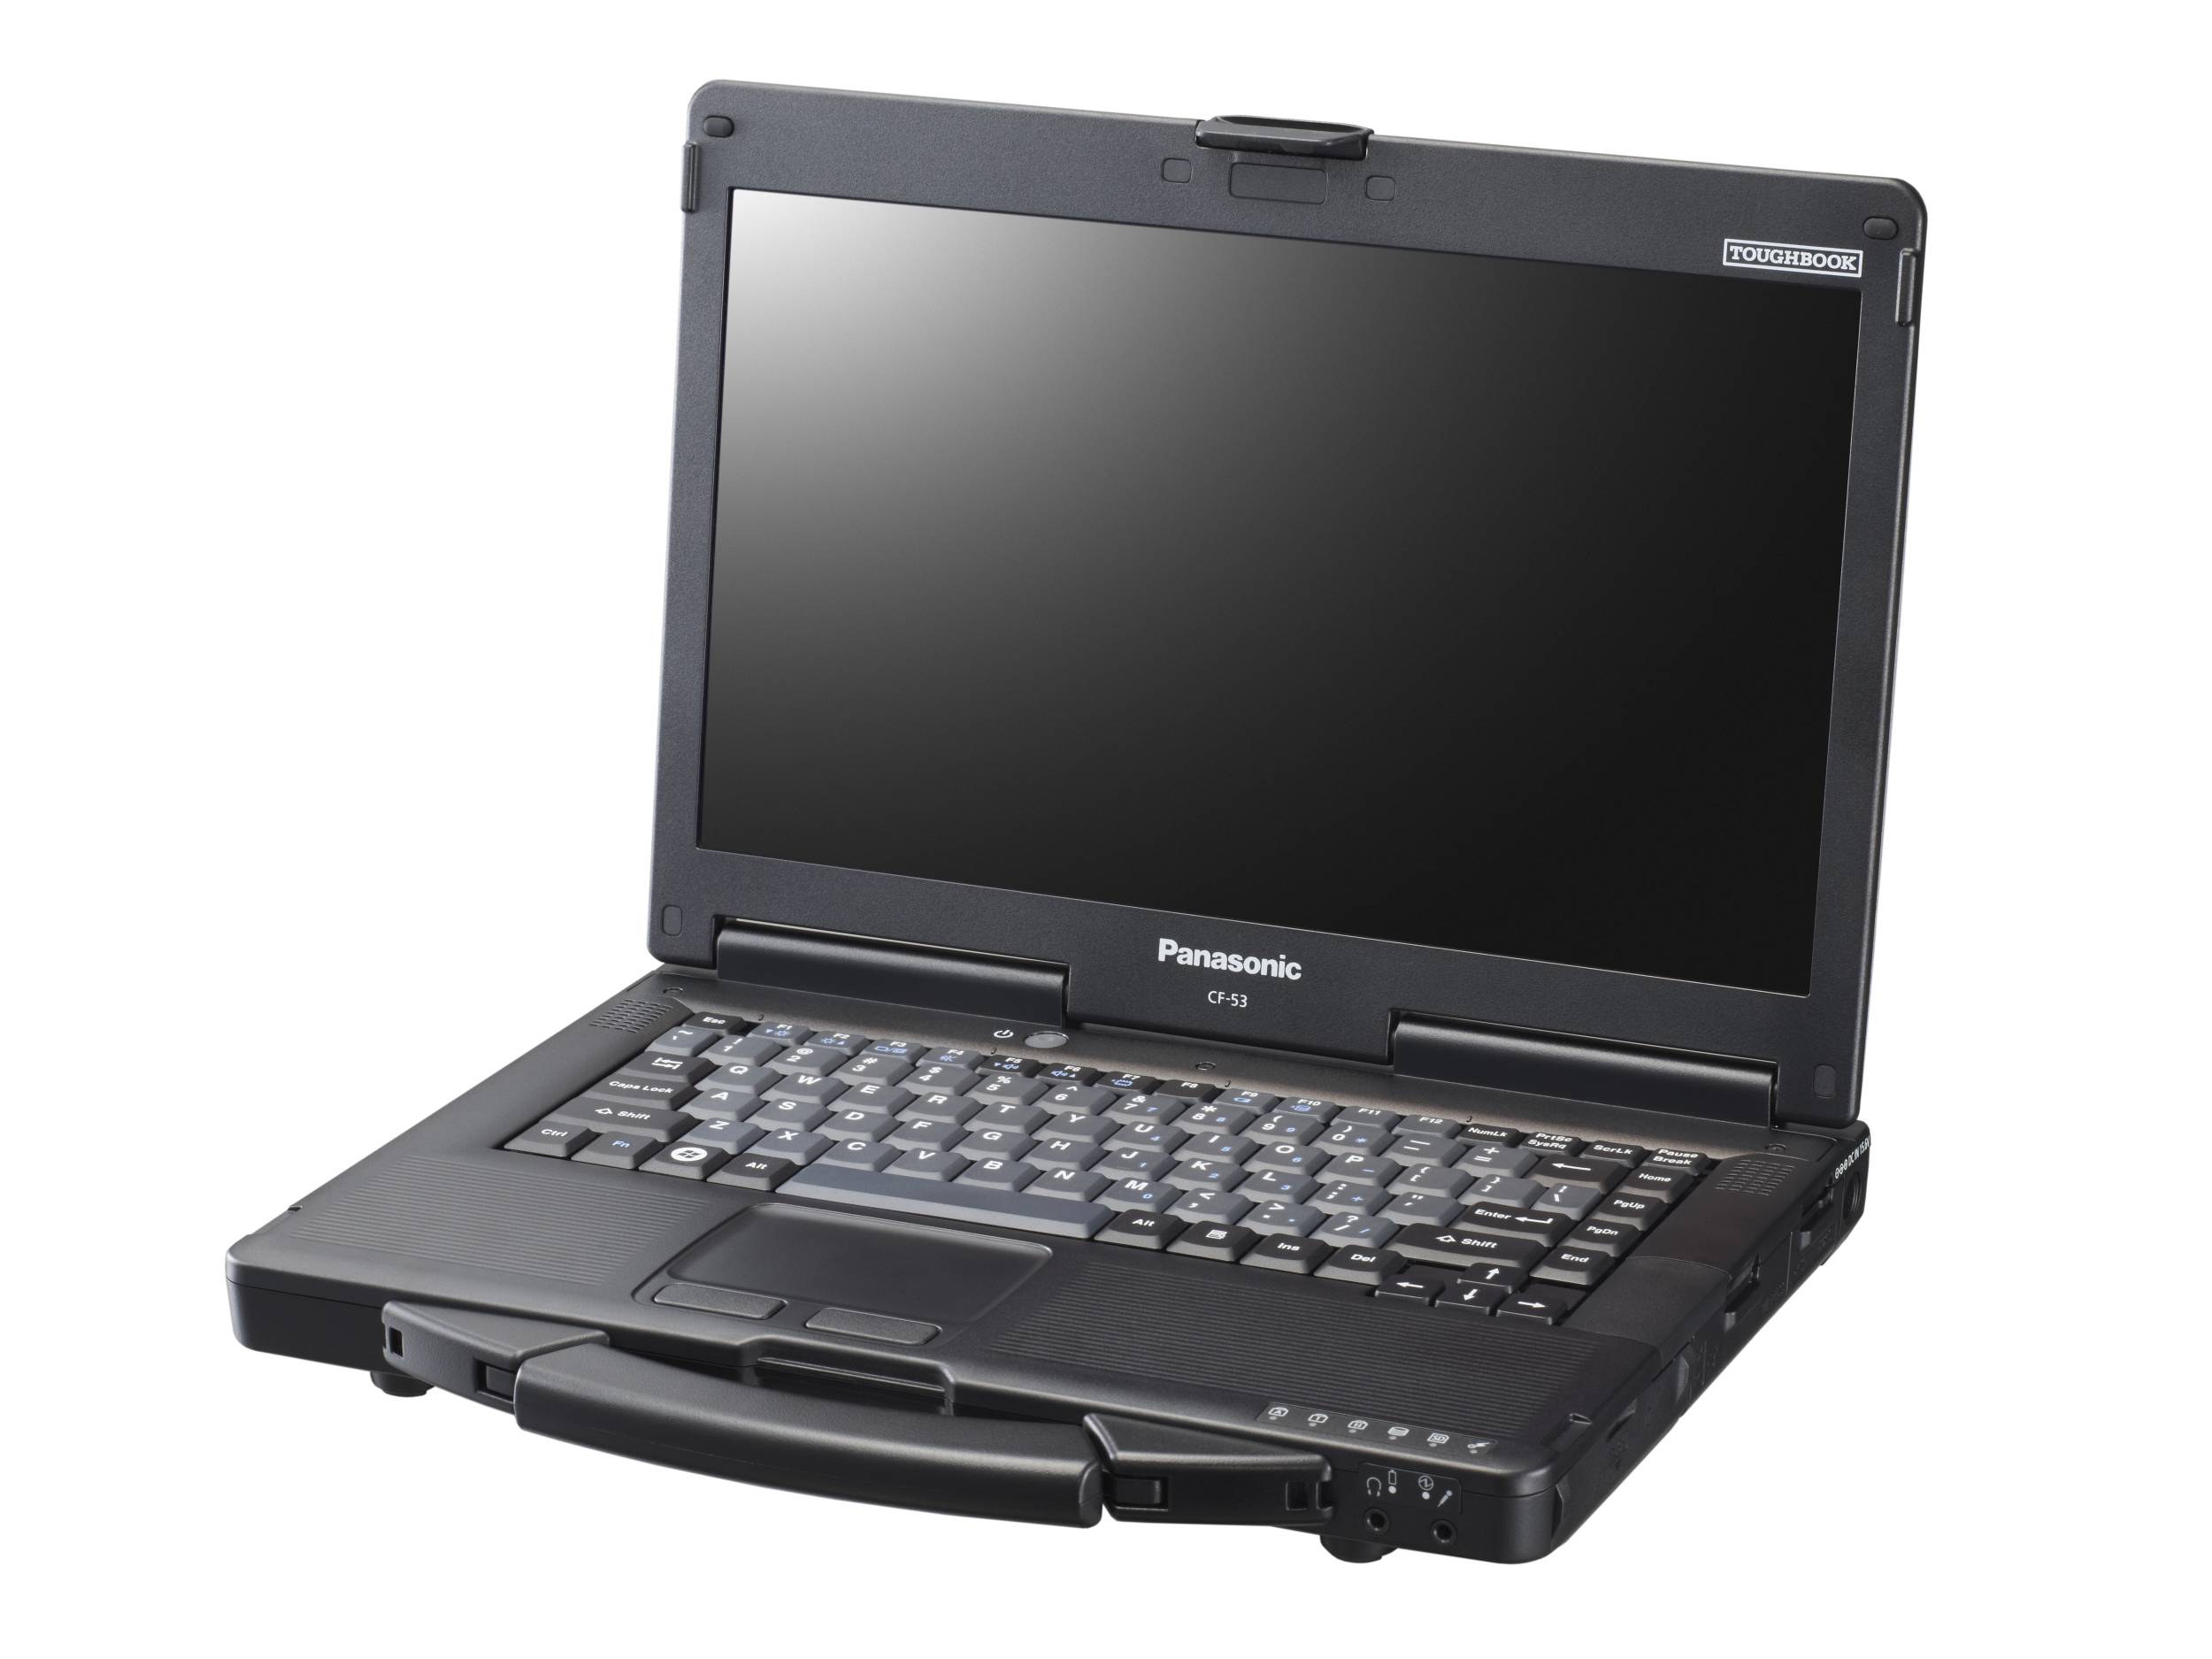 Used Panasonic A Grade CF-53 Toughbook 14-inch (High Definition-720p LED 1366 x 768) 2.1GHz Core i5 250GB HD 2 GB Memory Win 7 Pro OS Power Adapter Included - image 2 of 3